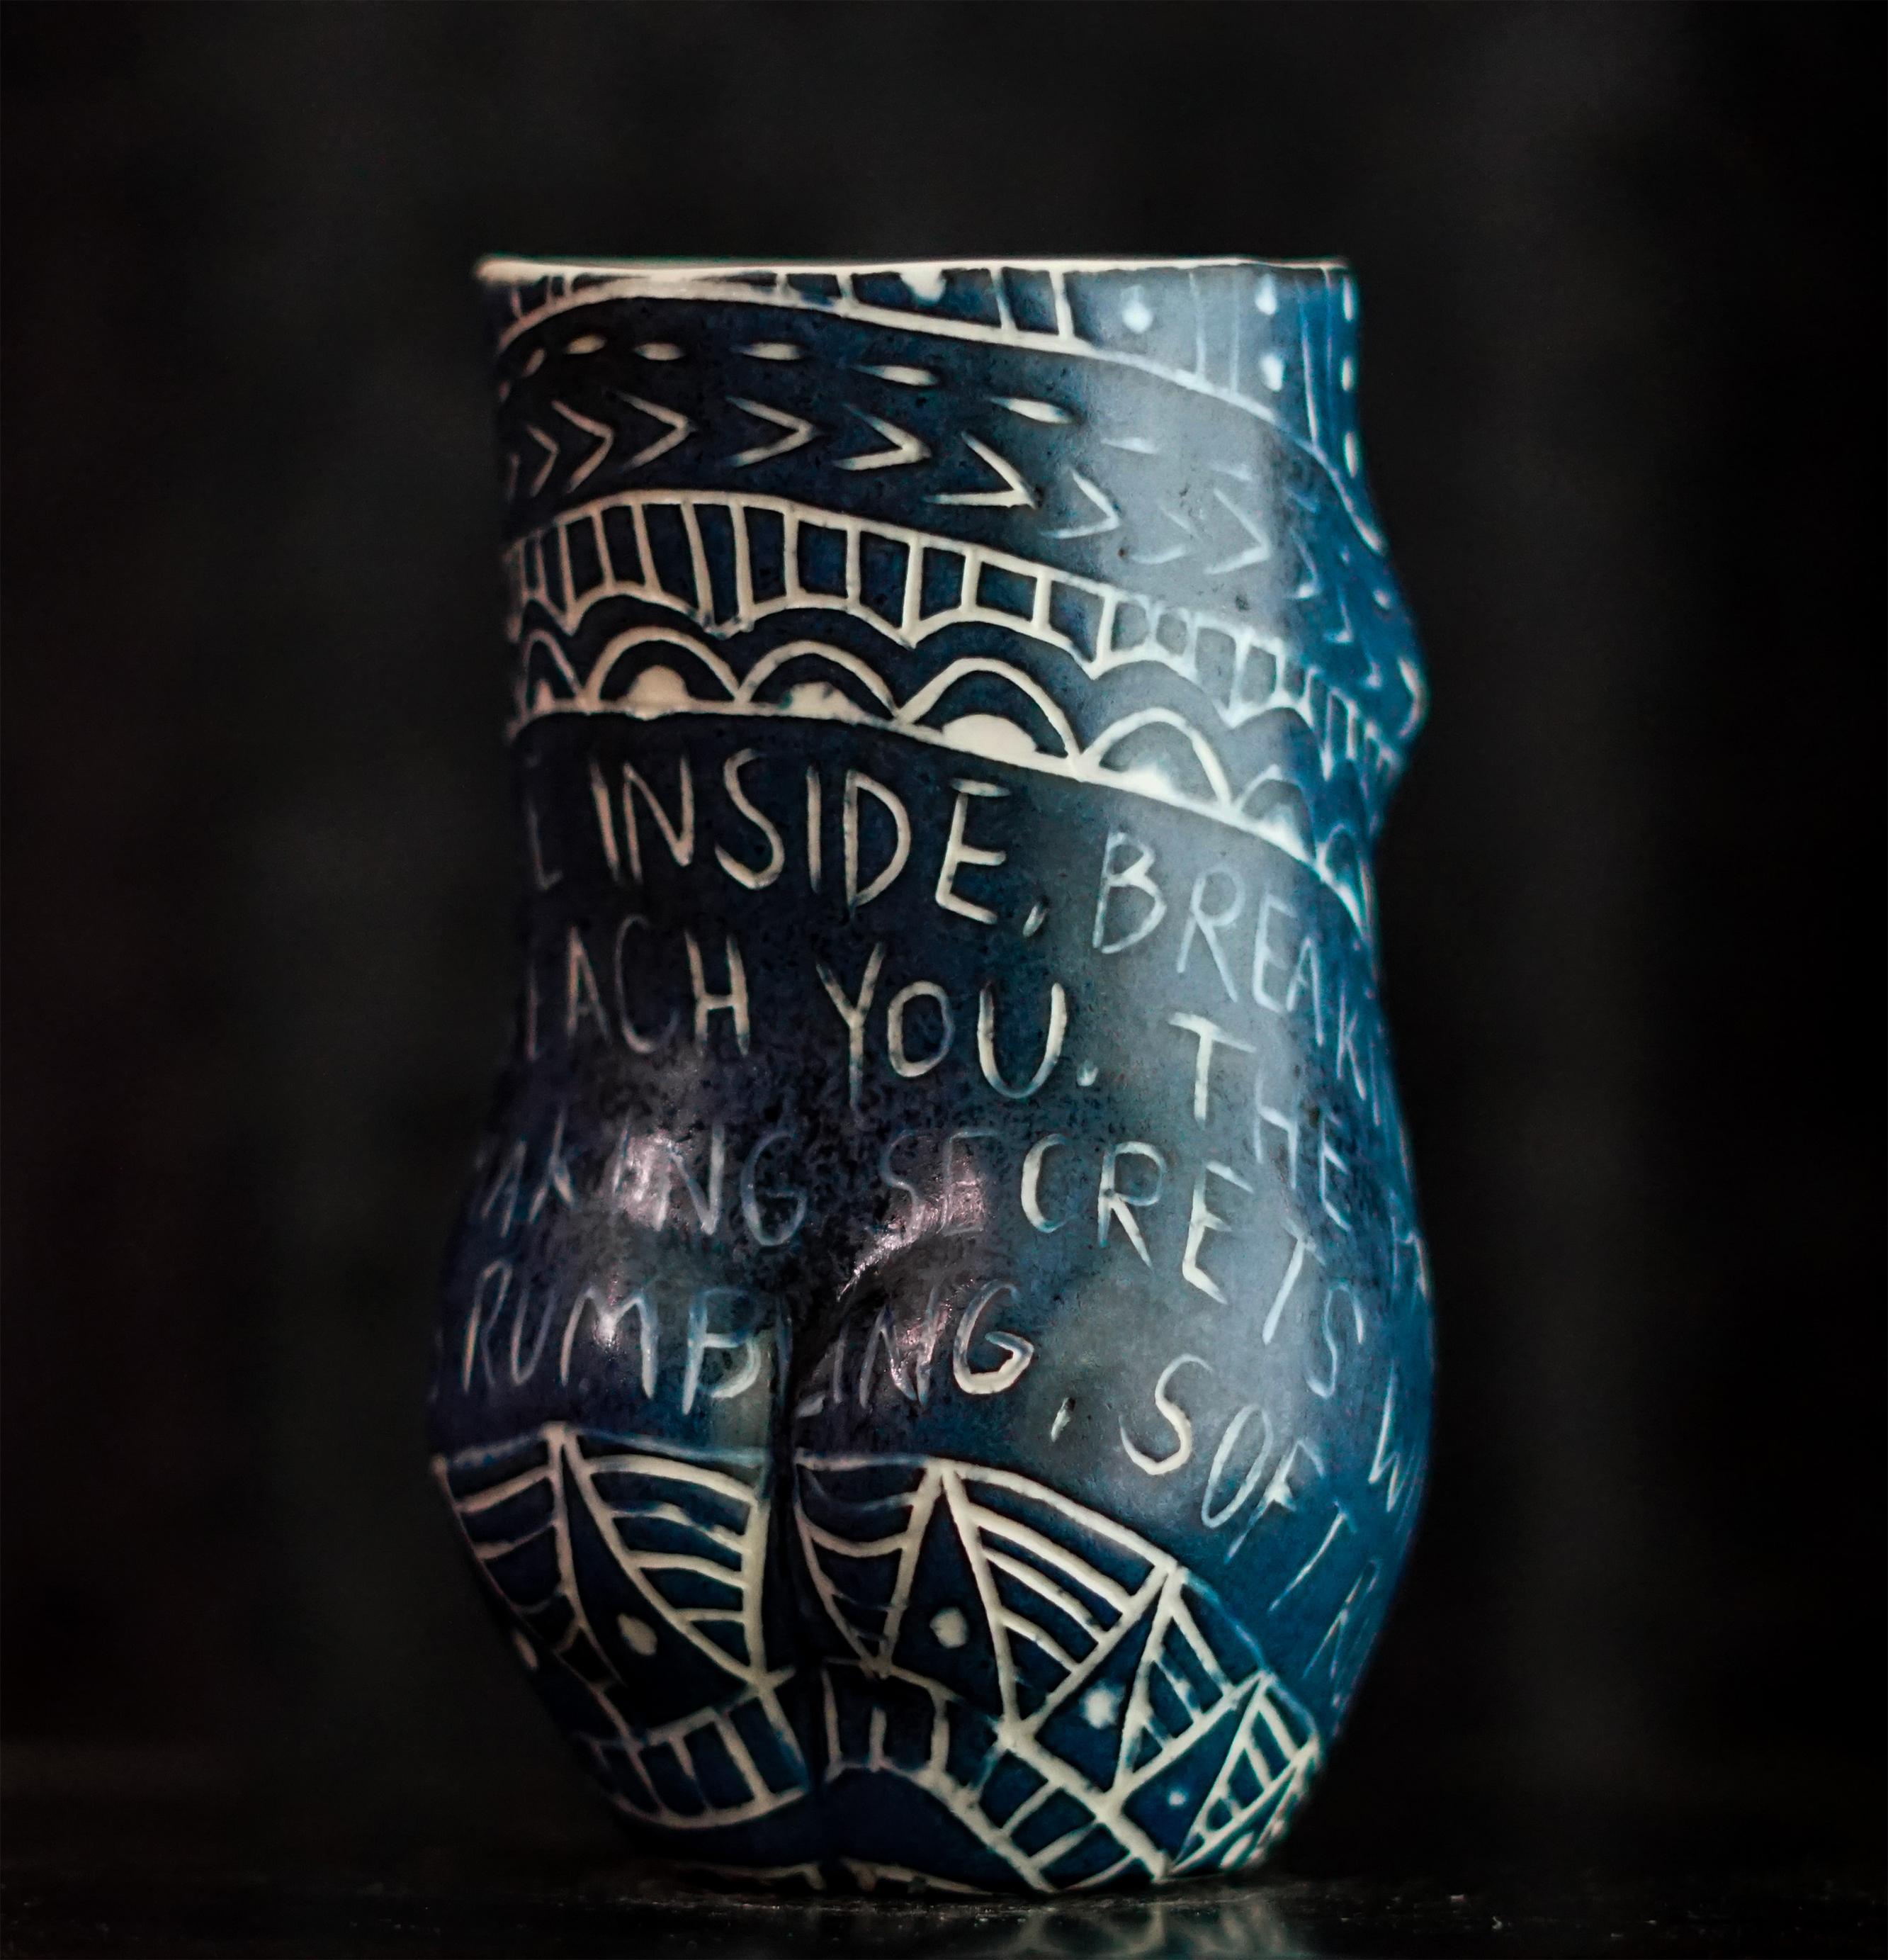 “...Is Beating Me From the Inside...” 2019
From the series Fragments of Our Love Story
Porcelain cup with sgraffito detailing
5 x 3 x 3 inches.

“Is beating me from the inside..” …Is beating me from the inside. Breaking my ribcage just to
reach you.